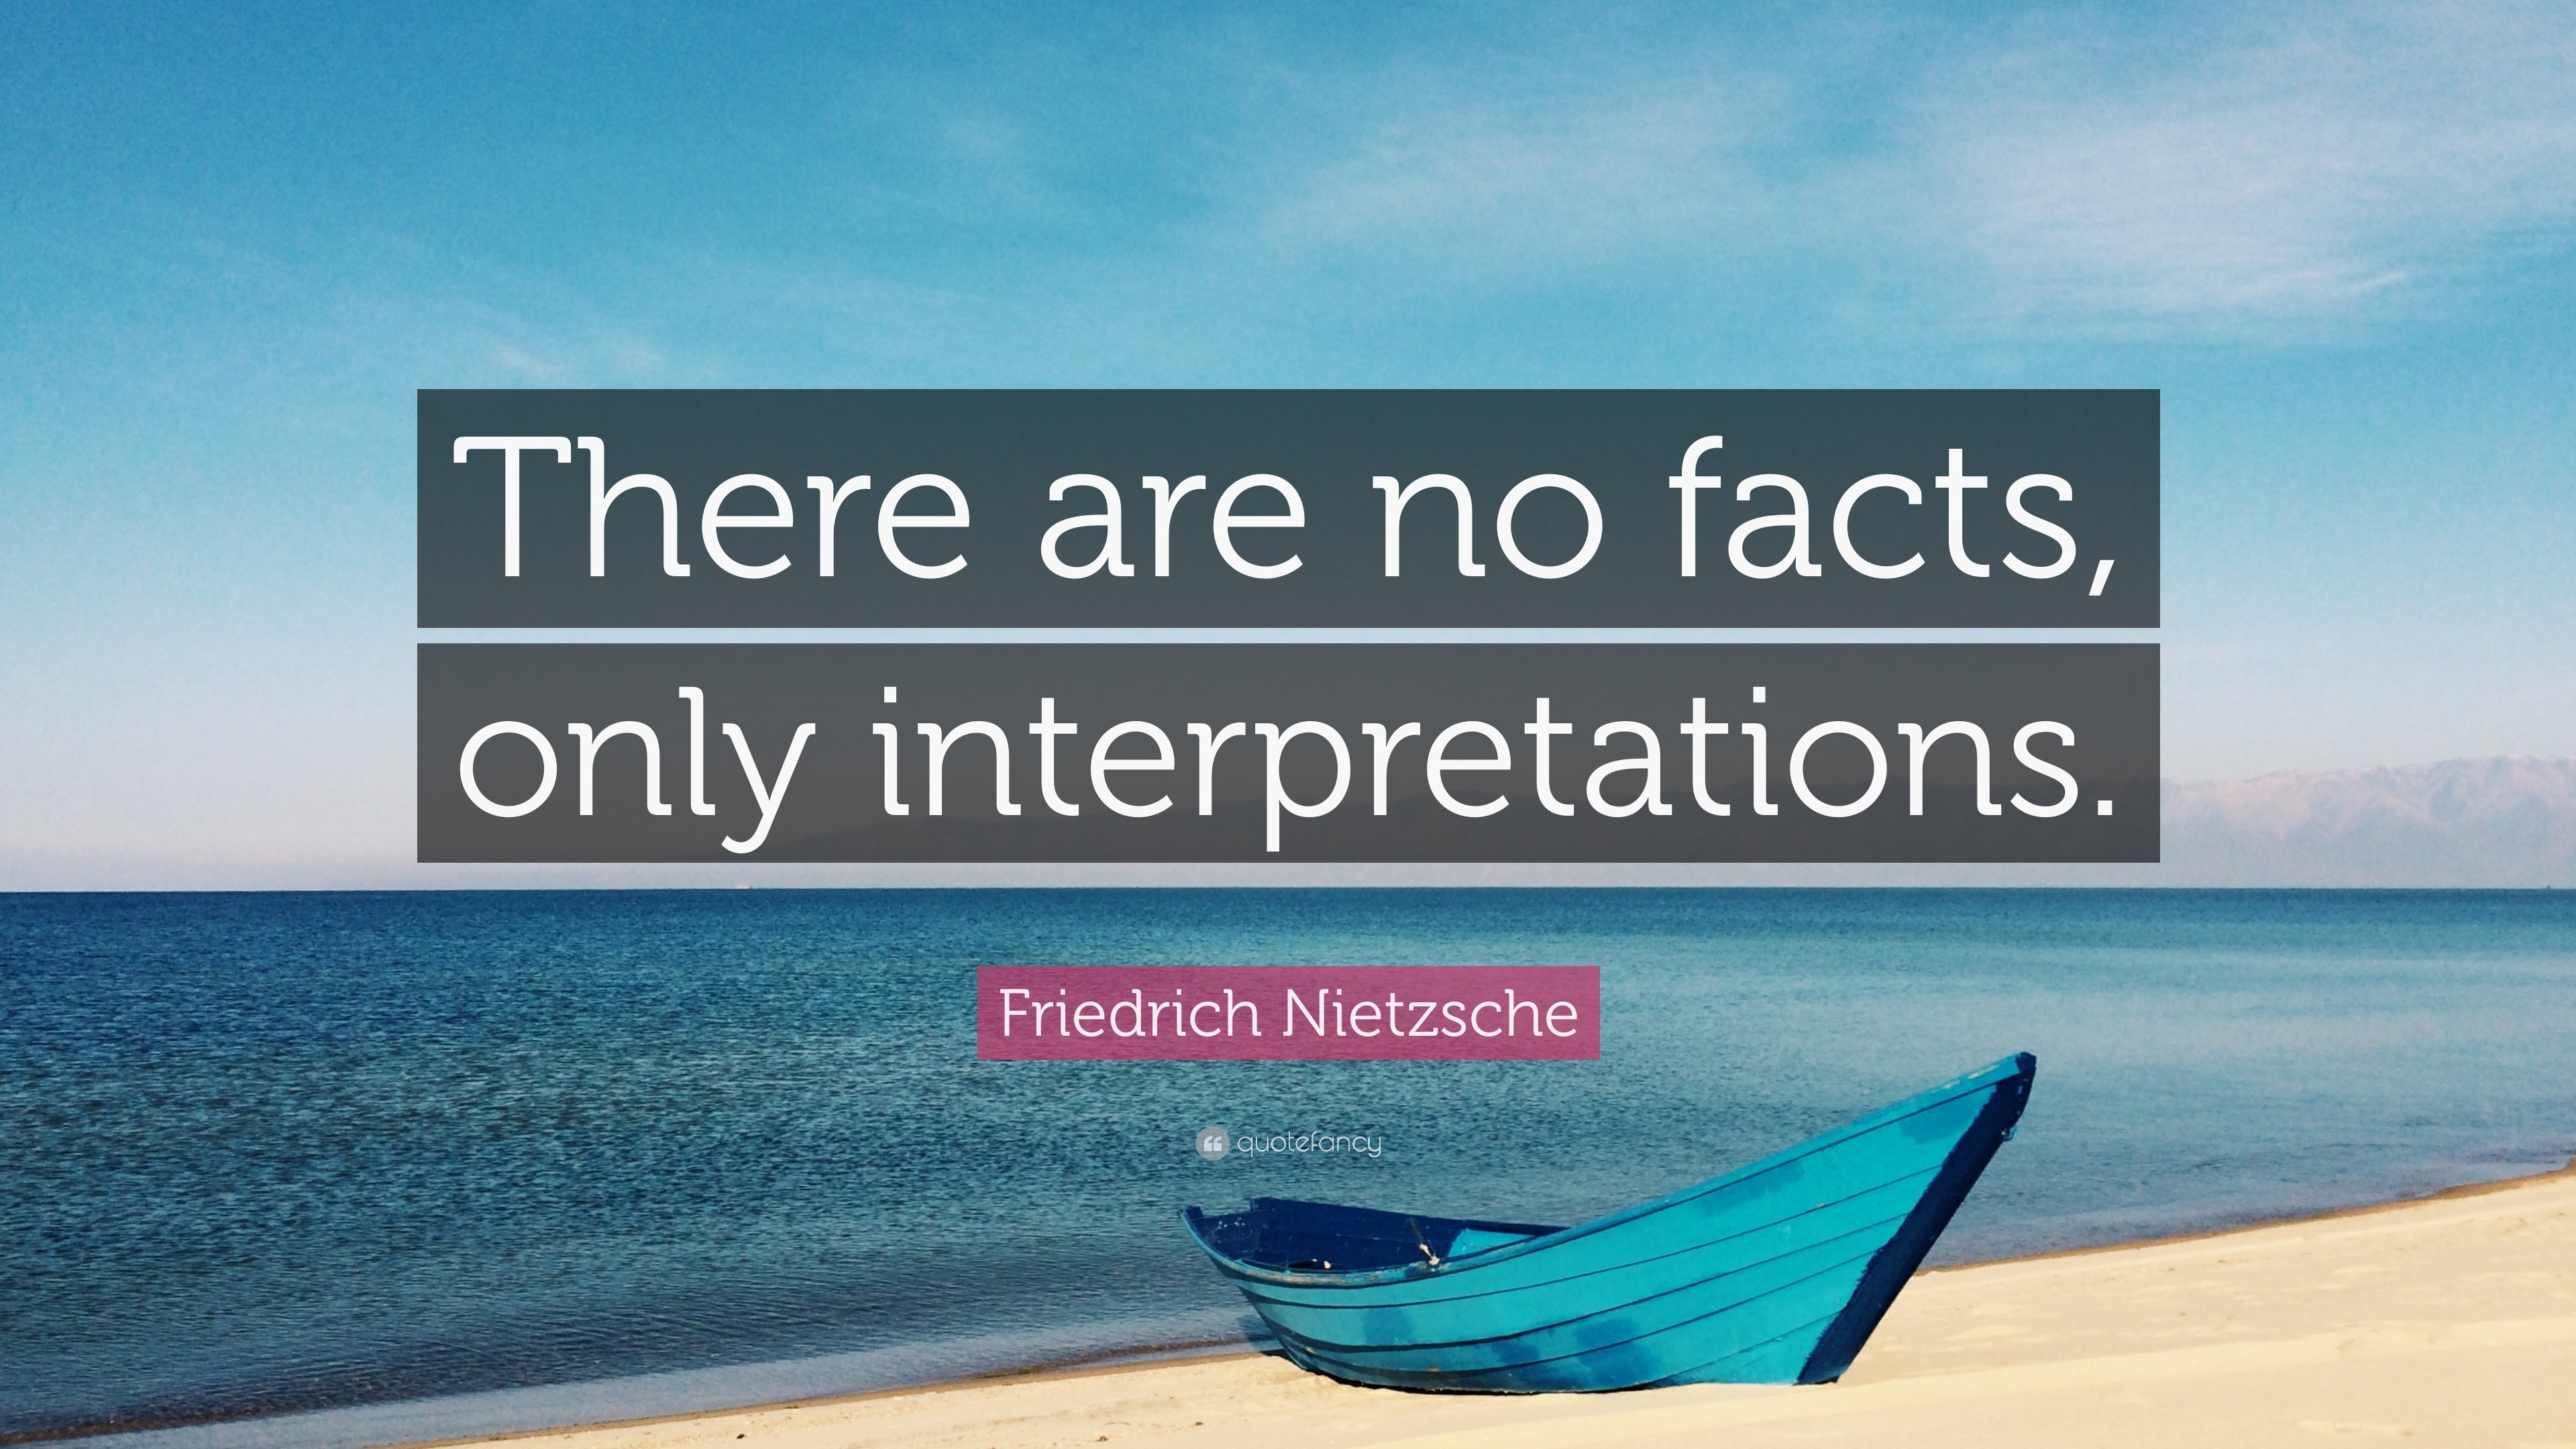 Friedrich Nietzsche Quote There Are No Facts Only Interpretations